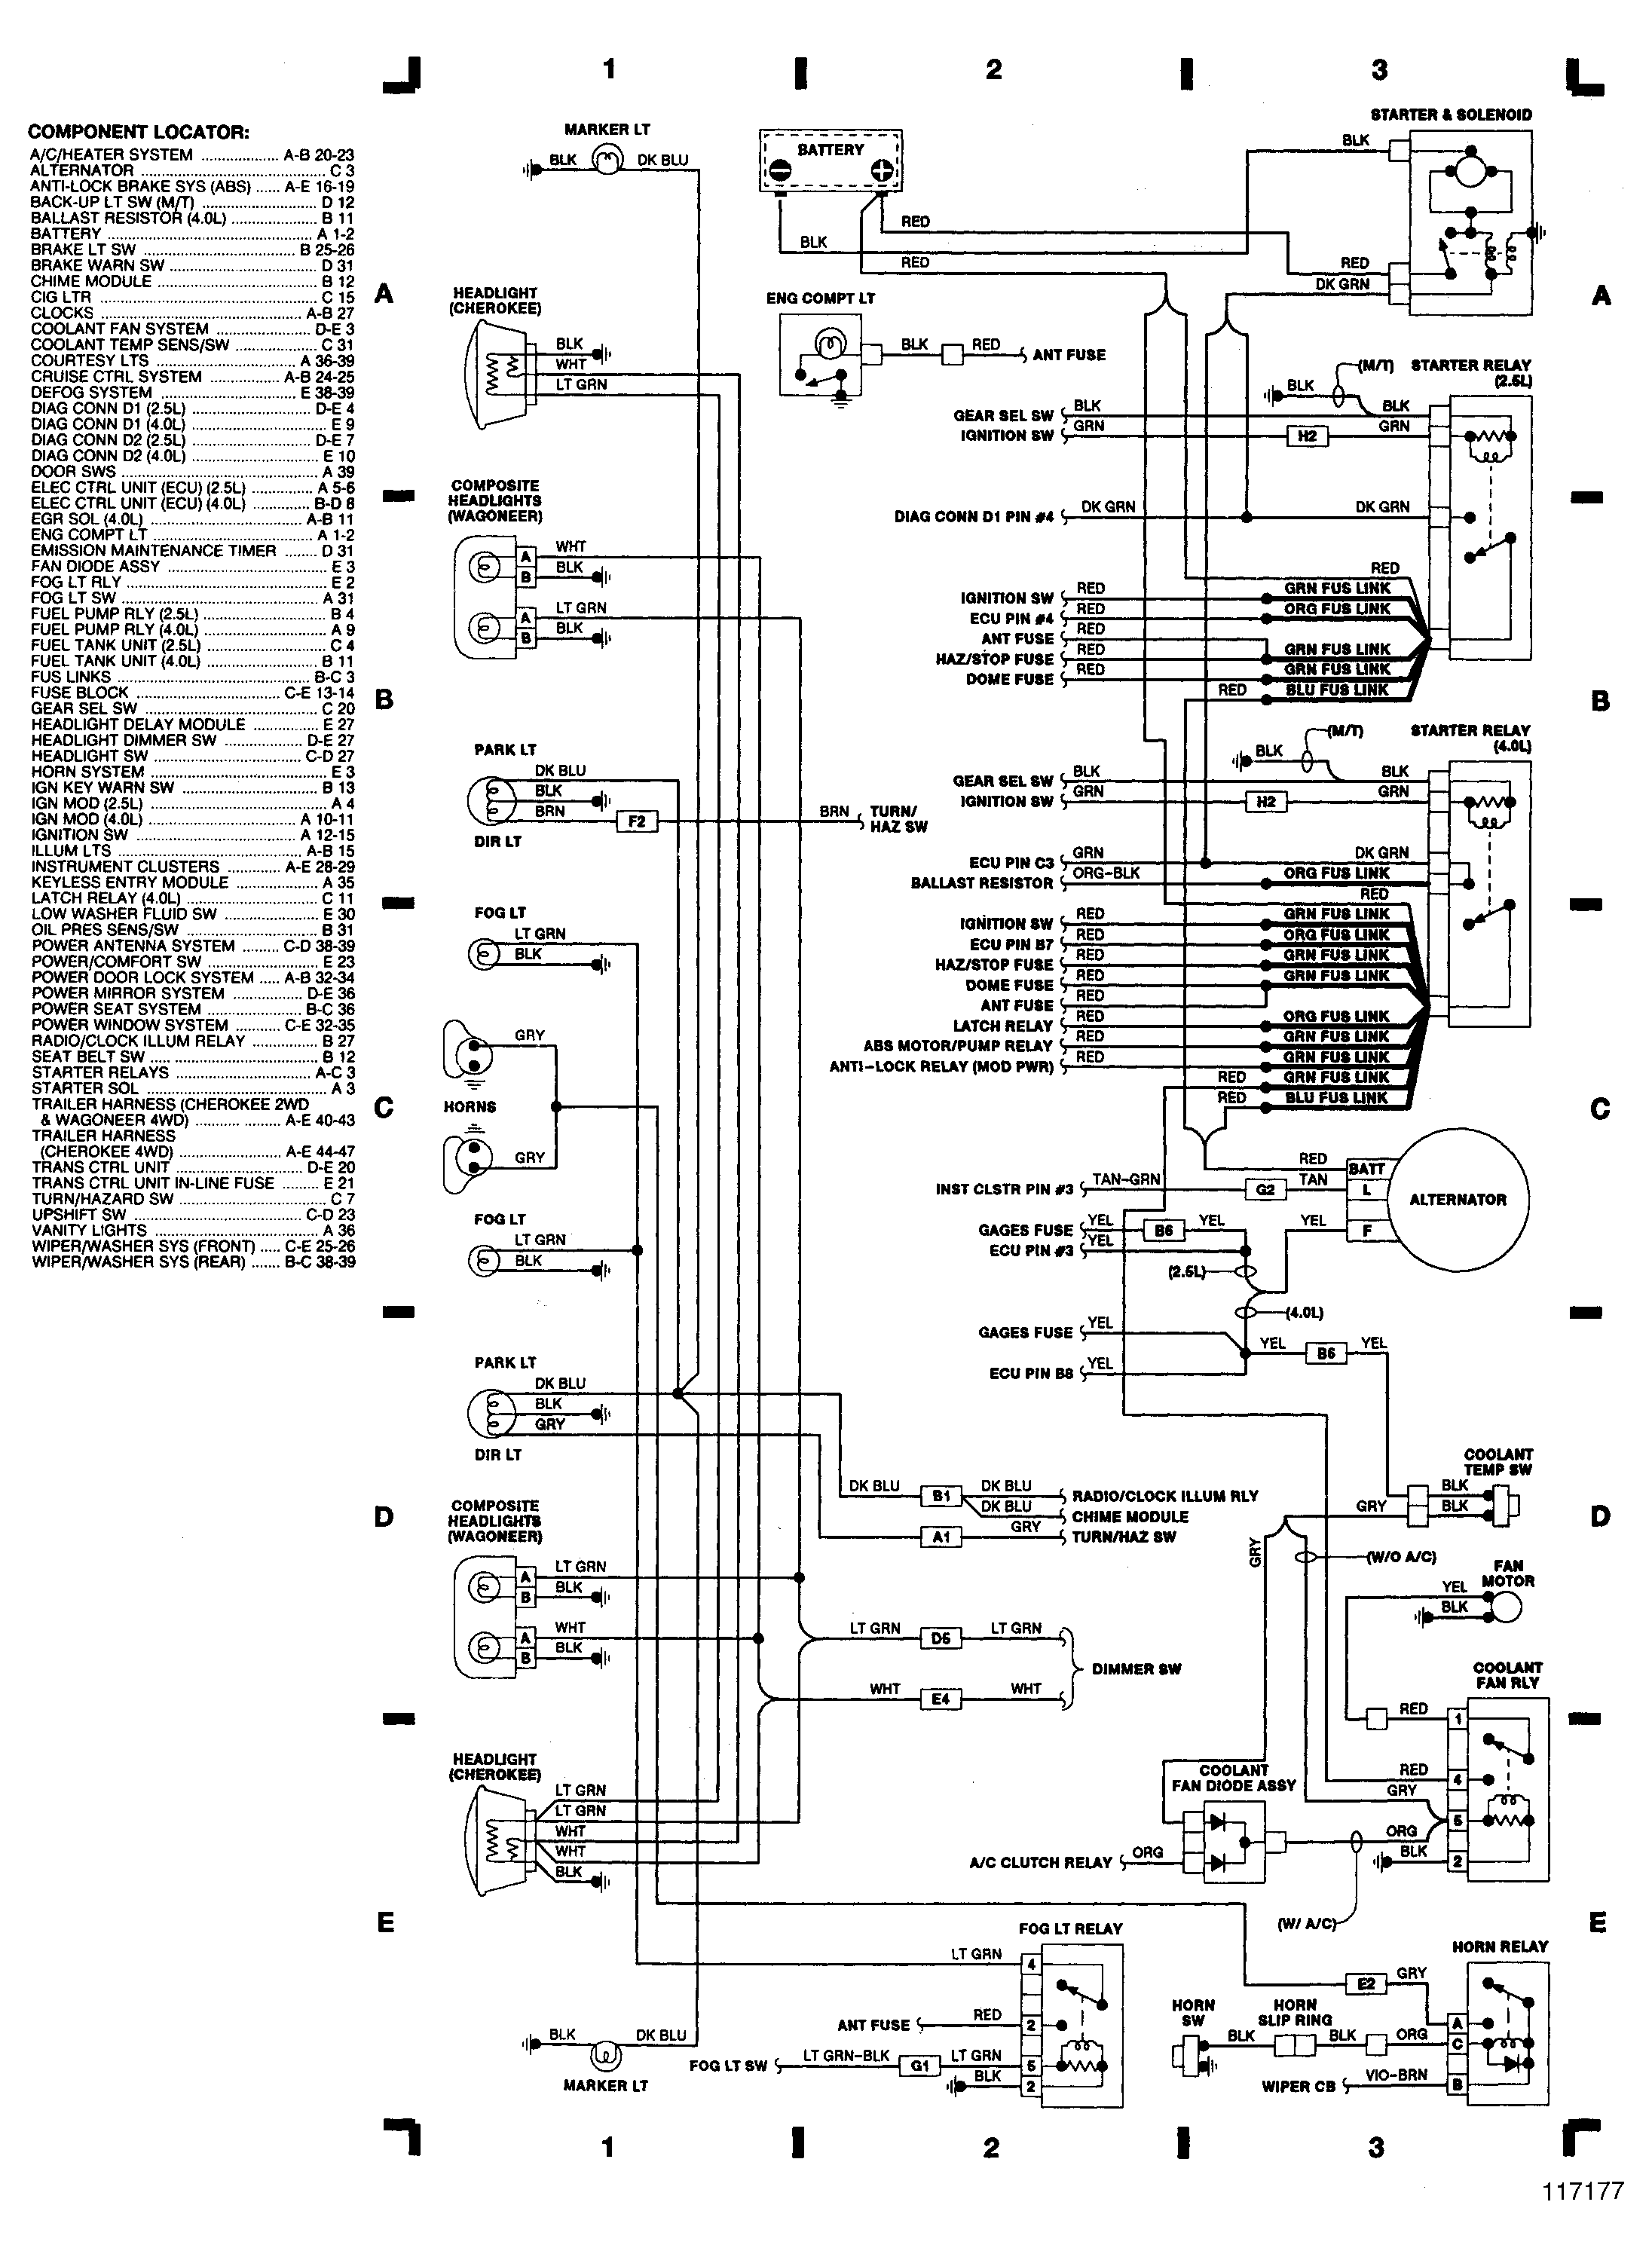 89 Mustang Ignition Switch Wiring Diagram from www.2carpros.com